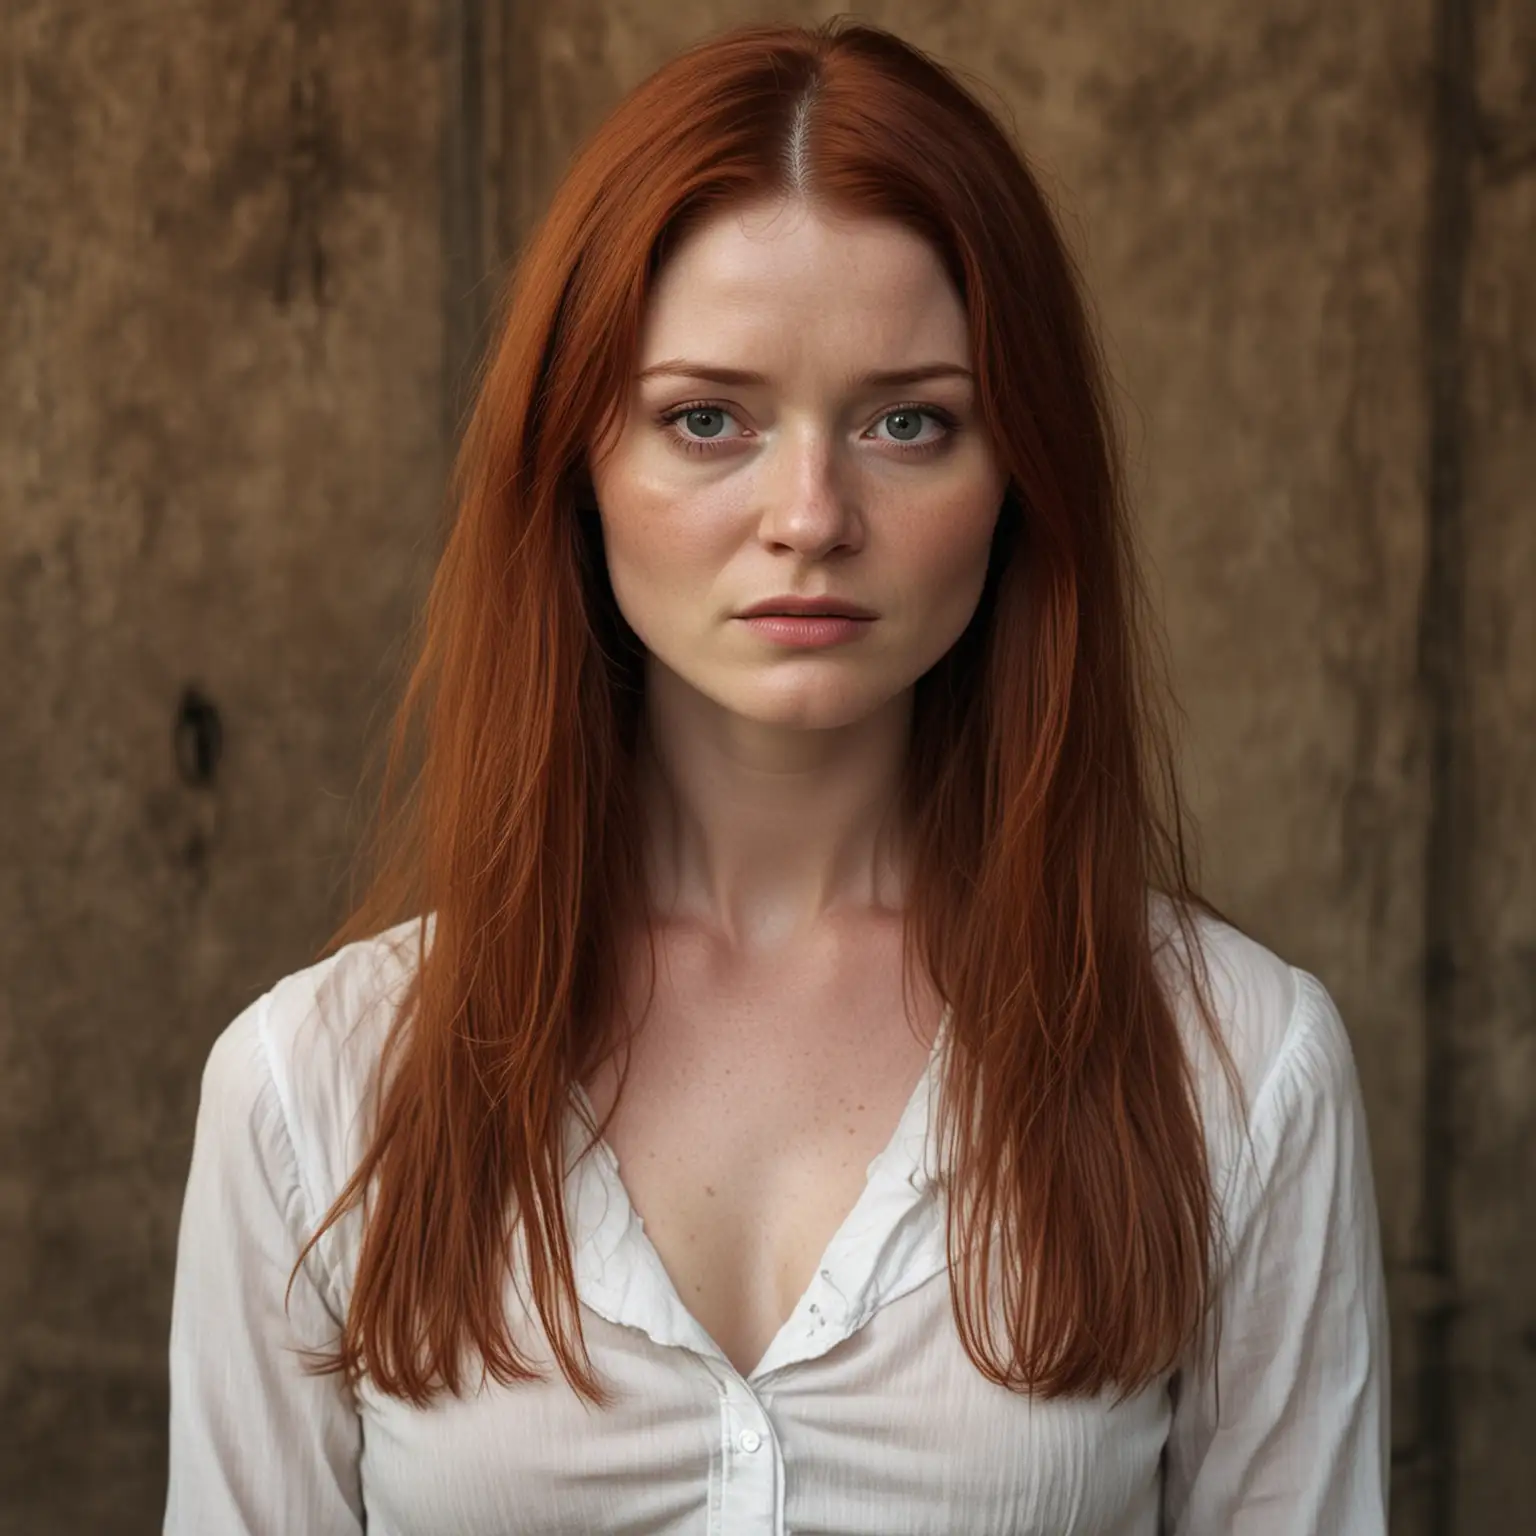 Frightened Bonnie Wright in LowCut Shirt Slave Market ID Photo